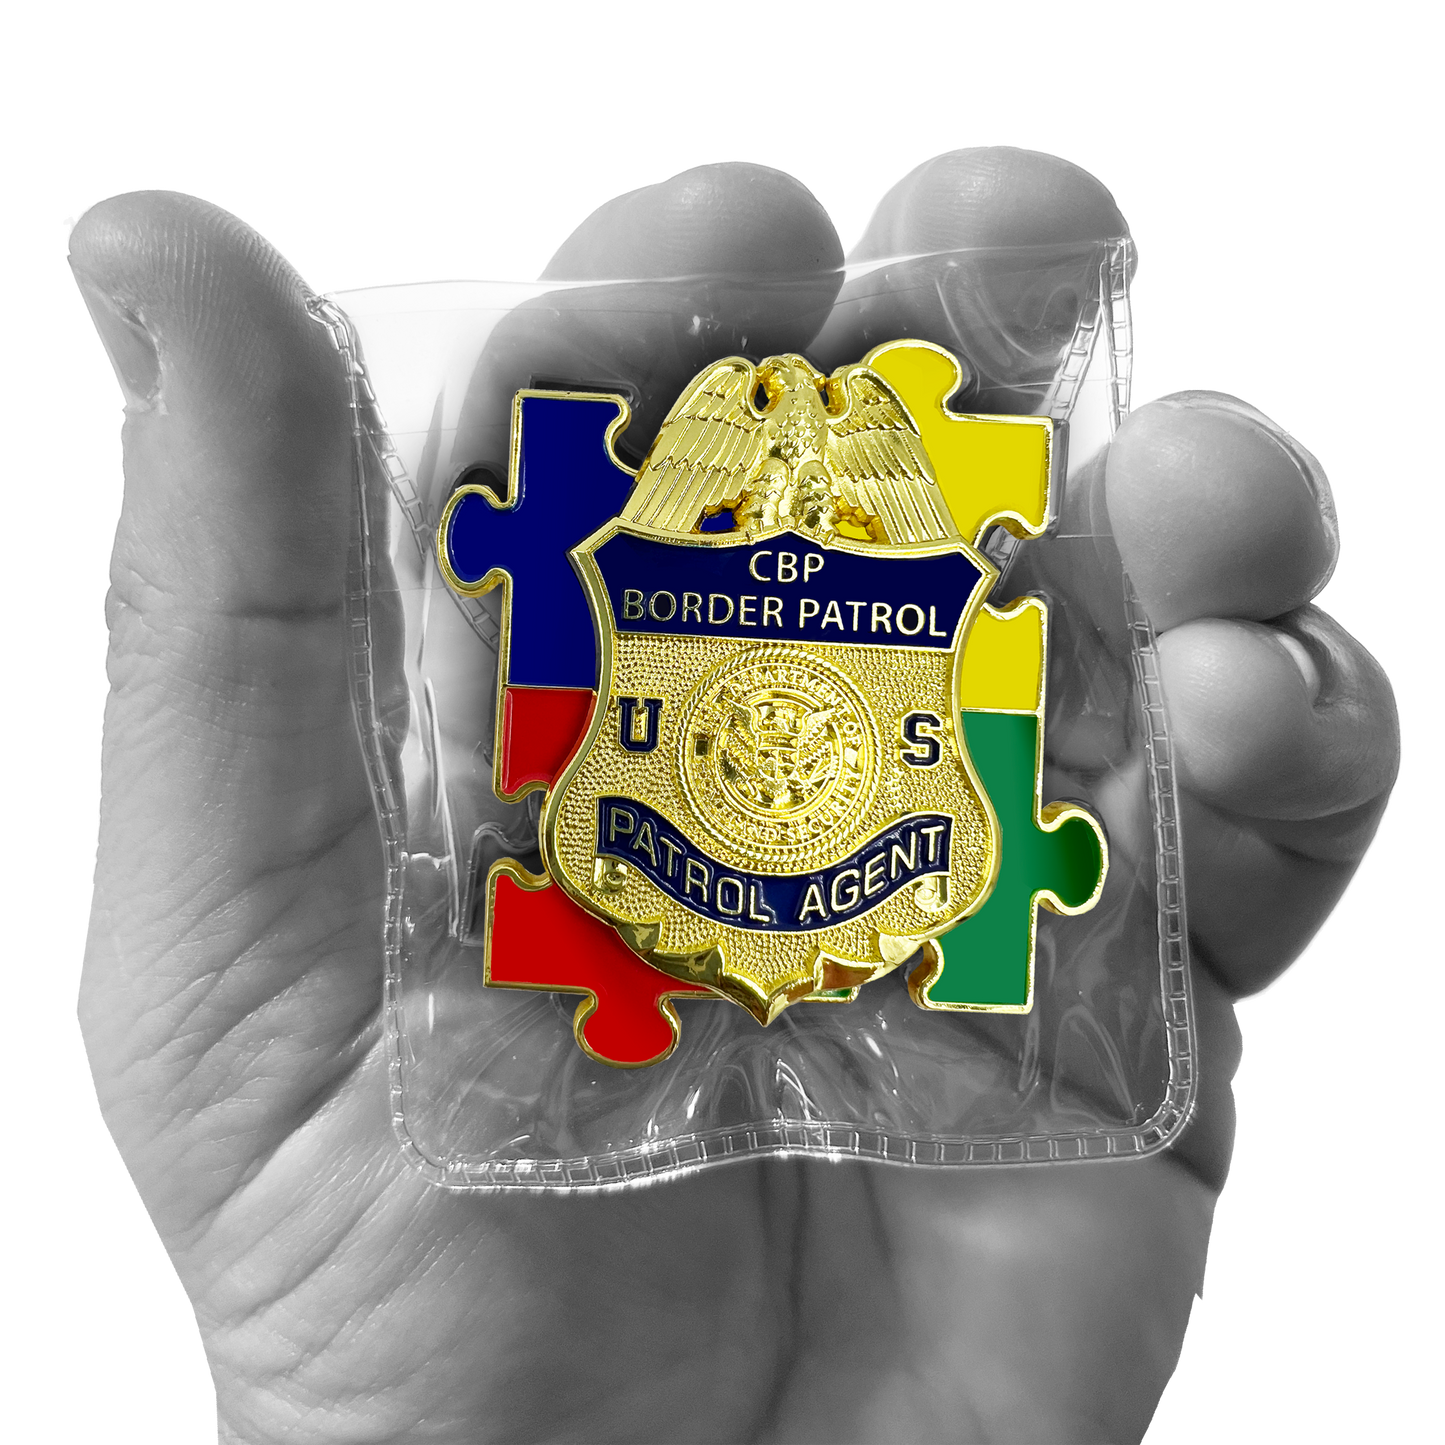 EL7-014 CBP Border Patrol Agent Autism Awareness Month lapel pin puzzle pieces display like a challenge coin